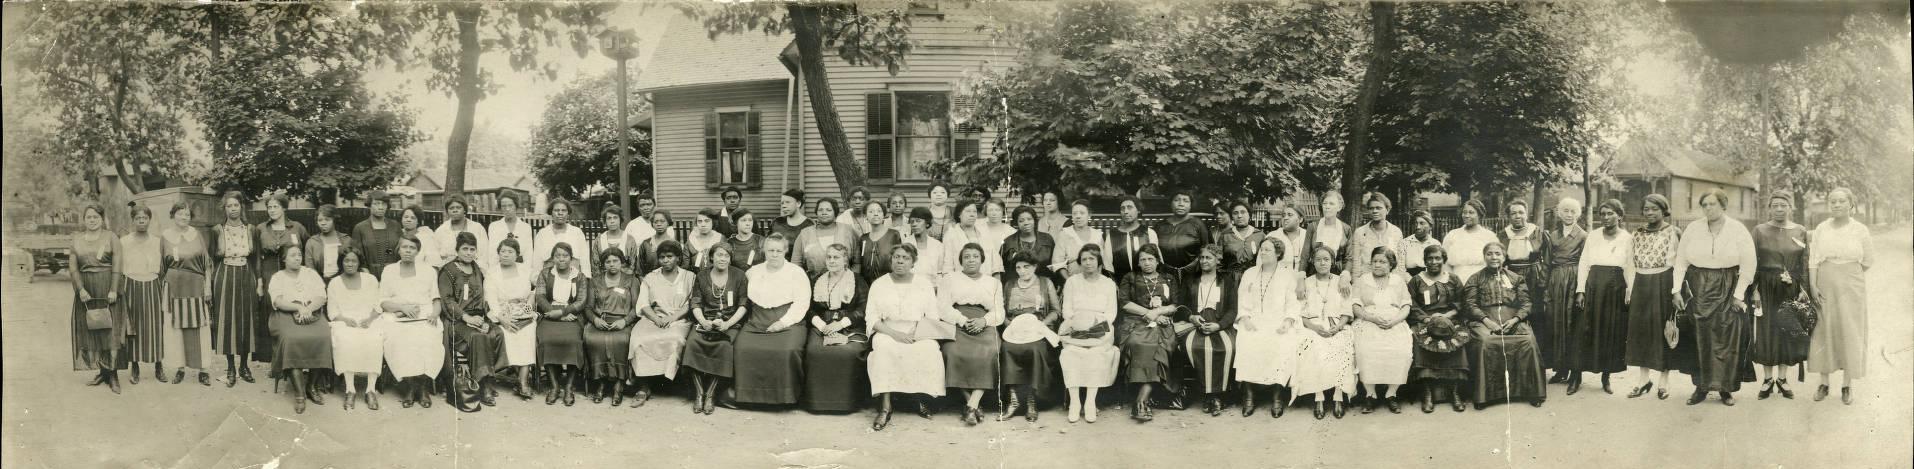 indiana-federation-of-colored-women-s-clubs-1-cropped.jpg